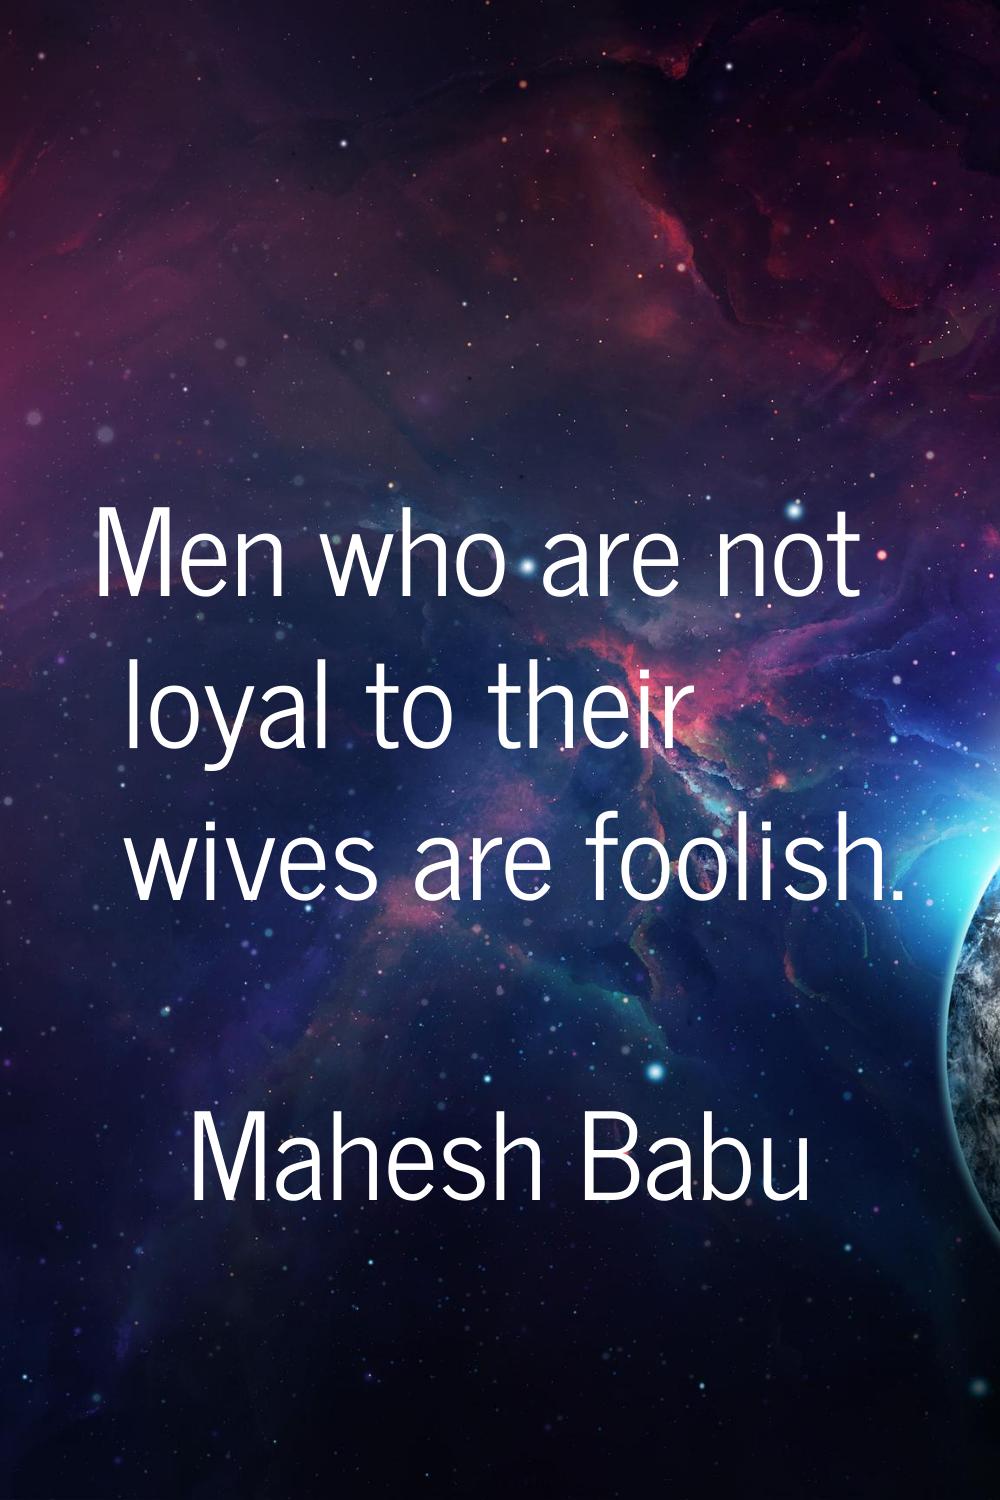 Men who are not loyal to their wives are foolish.